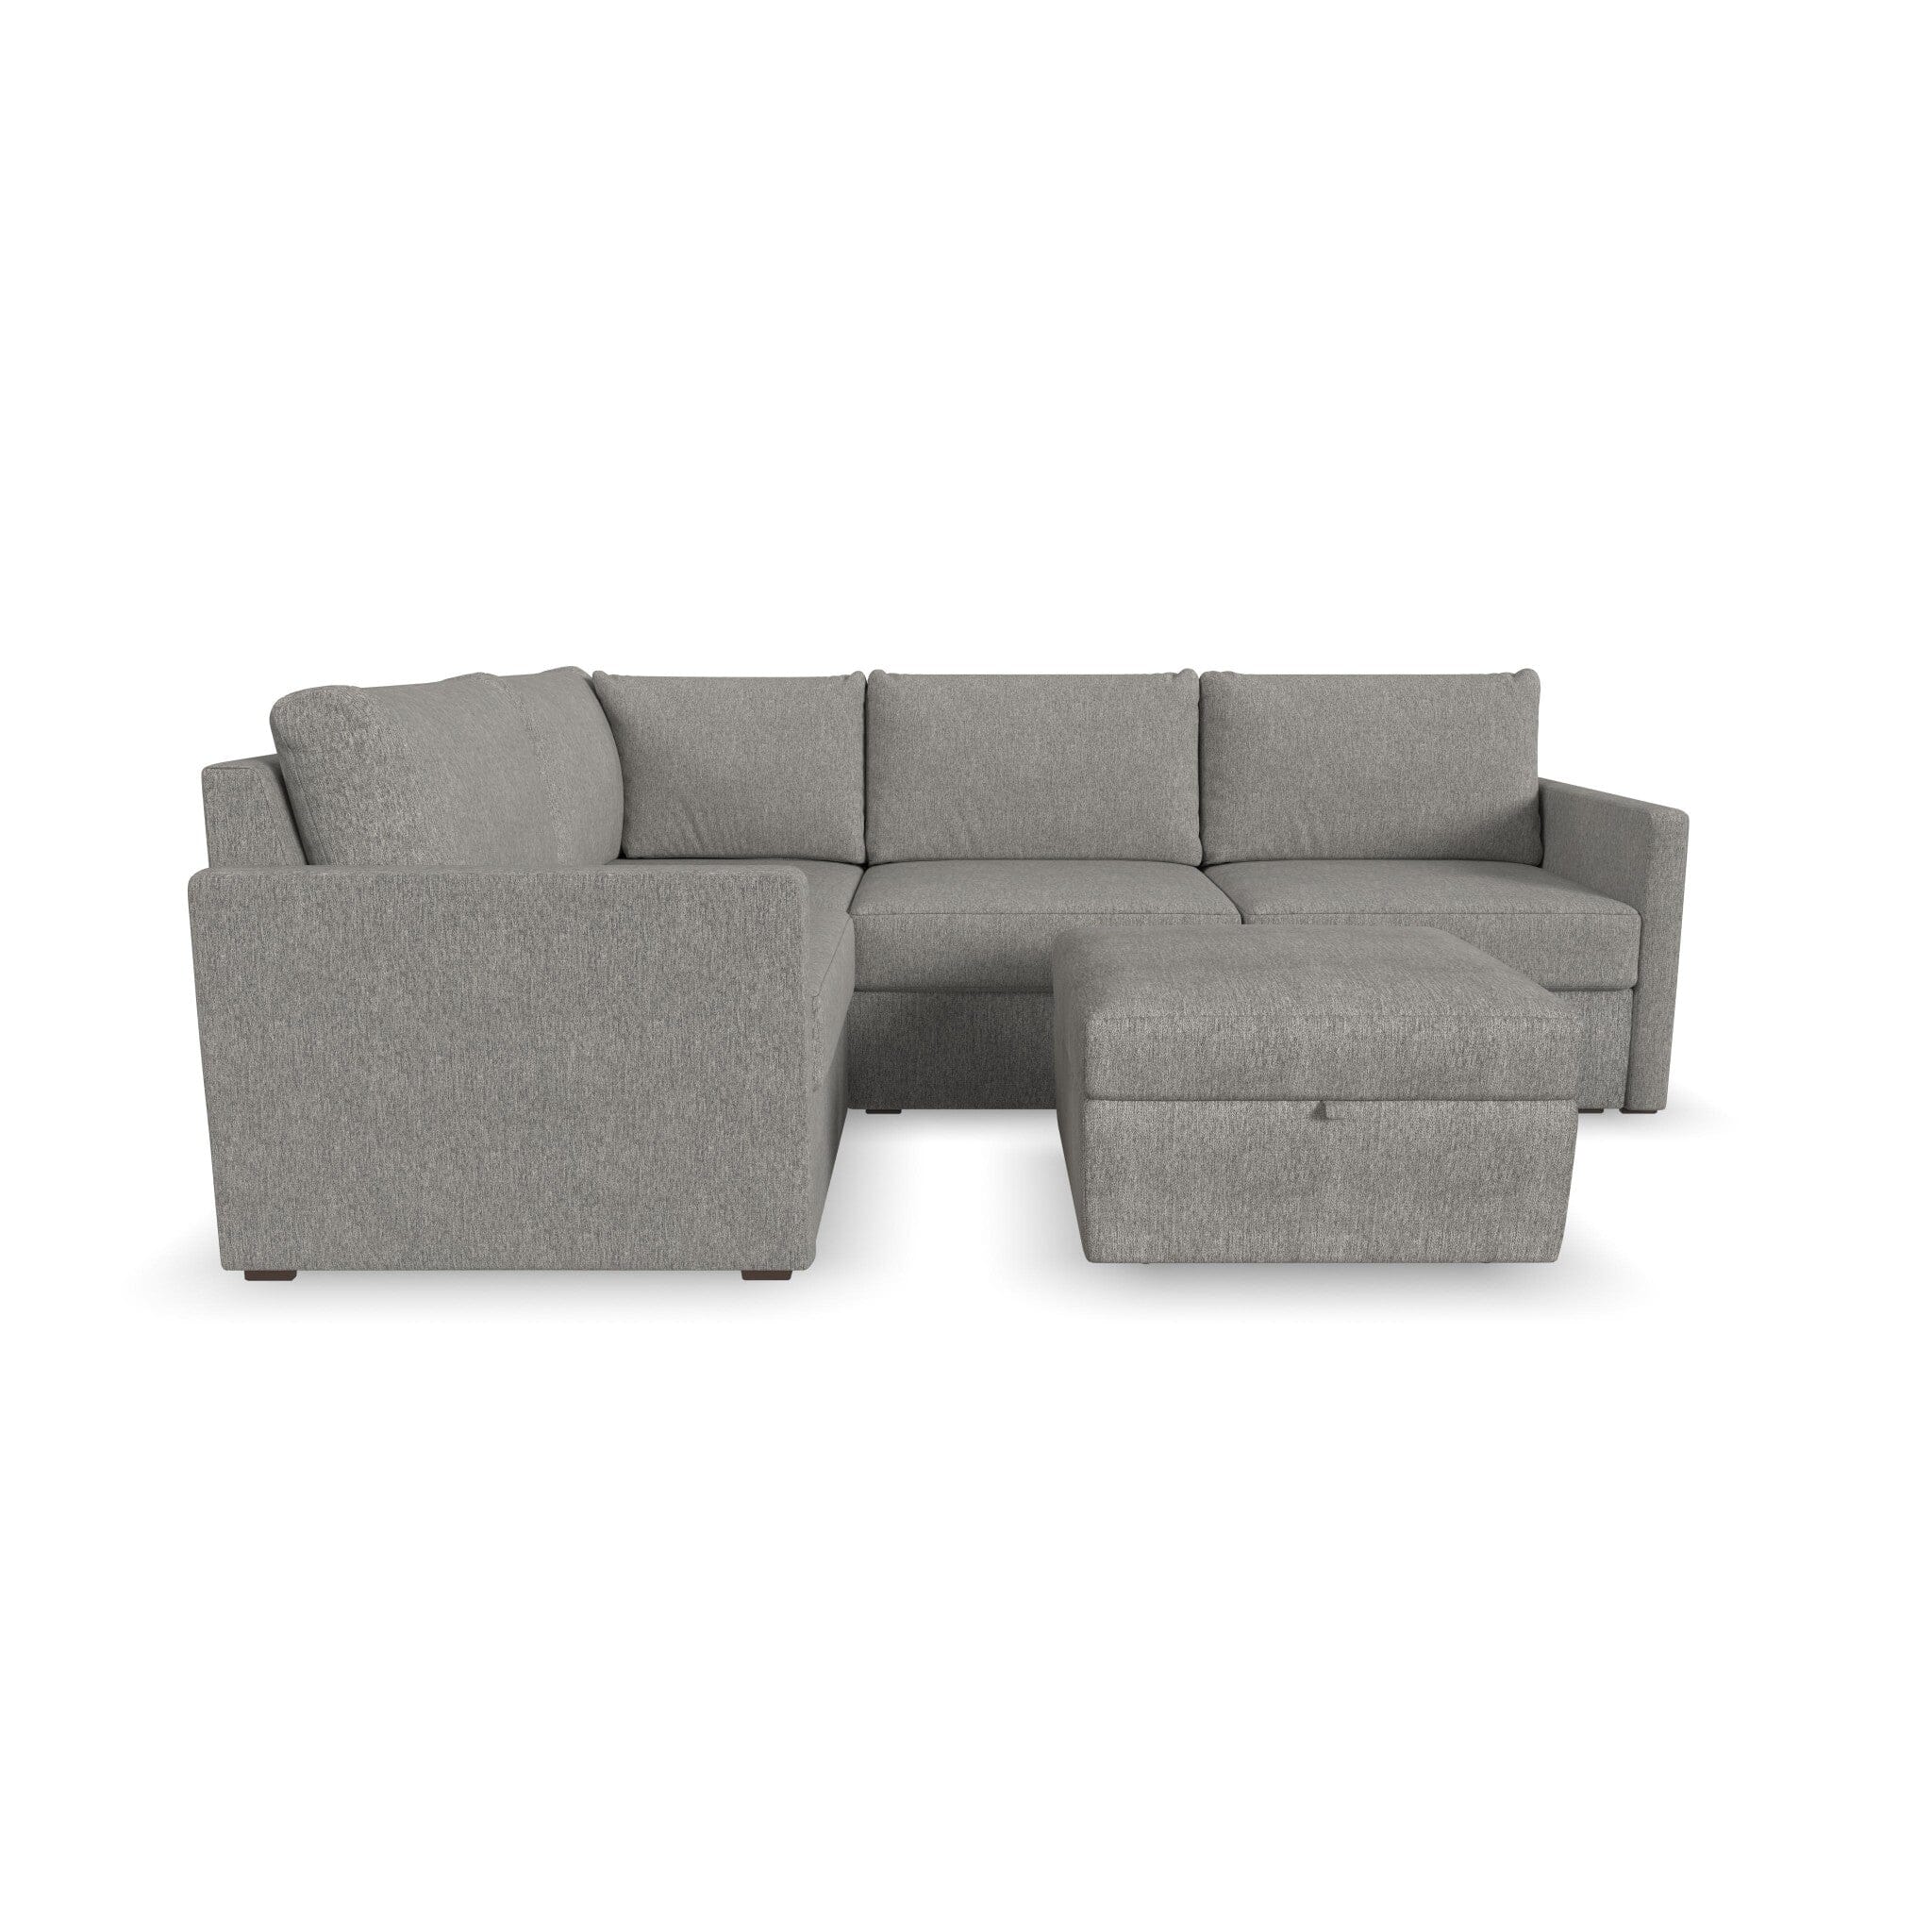 Traditional 4-Seat Sectional with Narrow Arm and Storage Ottoman By Flex Sectional Flex